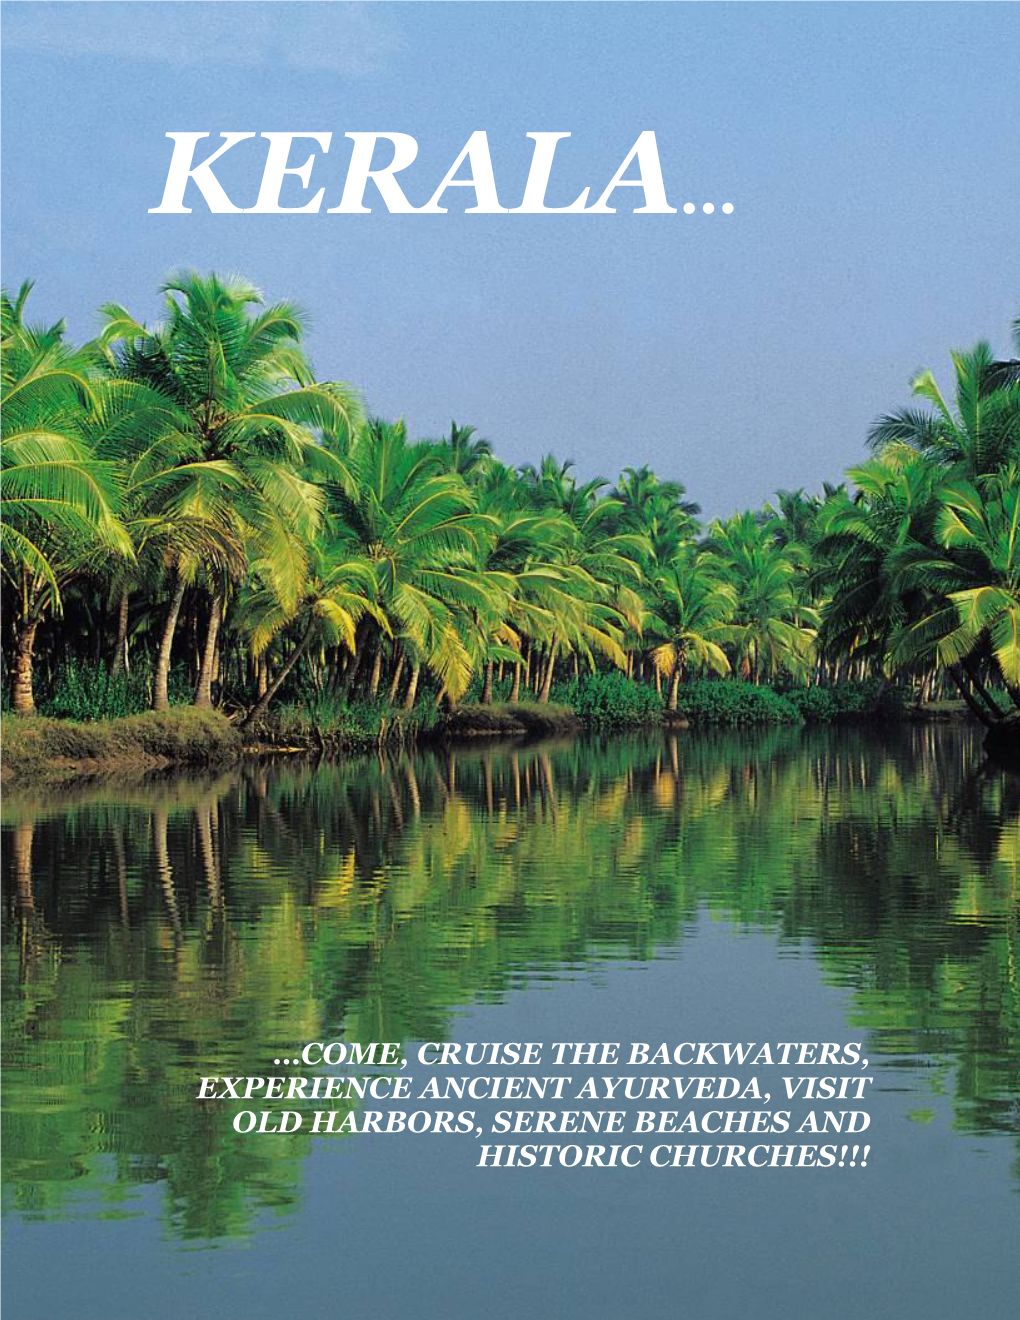 Come, Cruise the Backwaters, Experience Ancient Ayurveda, Visit Old Harbors, Serene Beaches and Historic Churches!!!